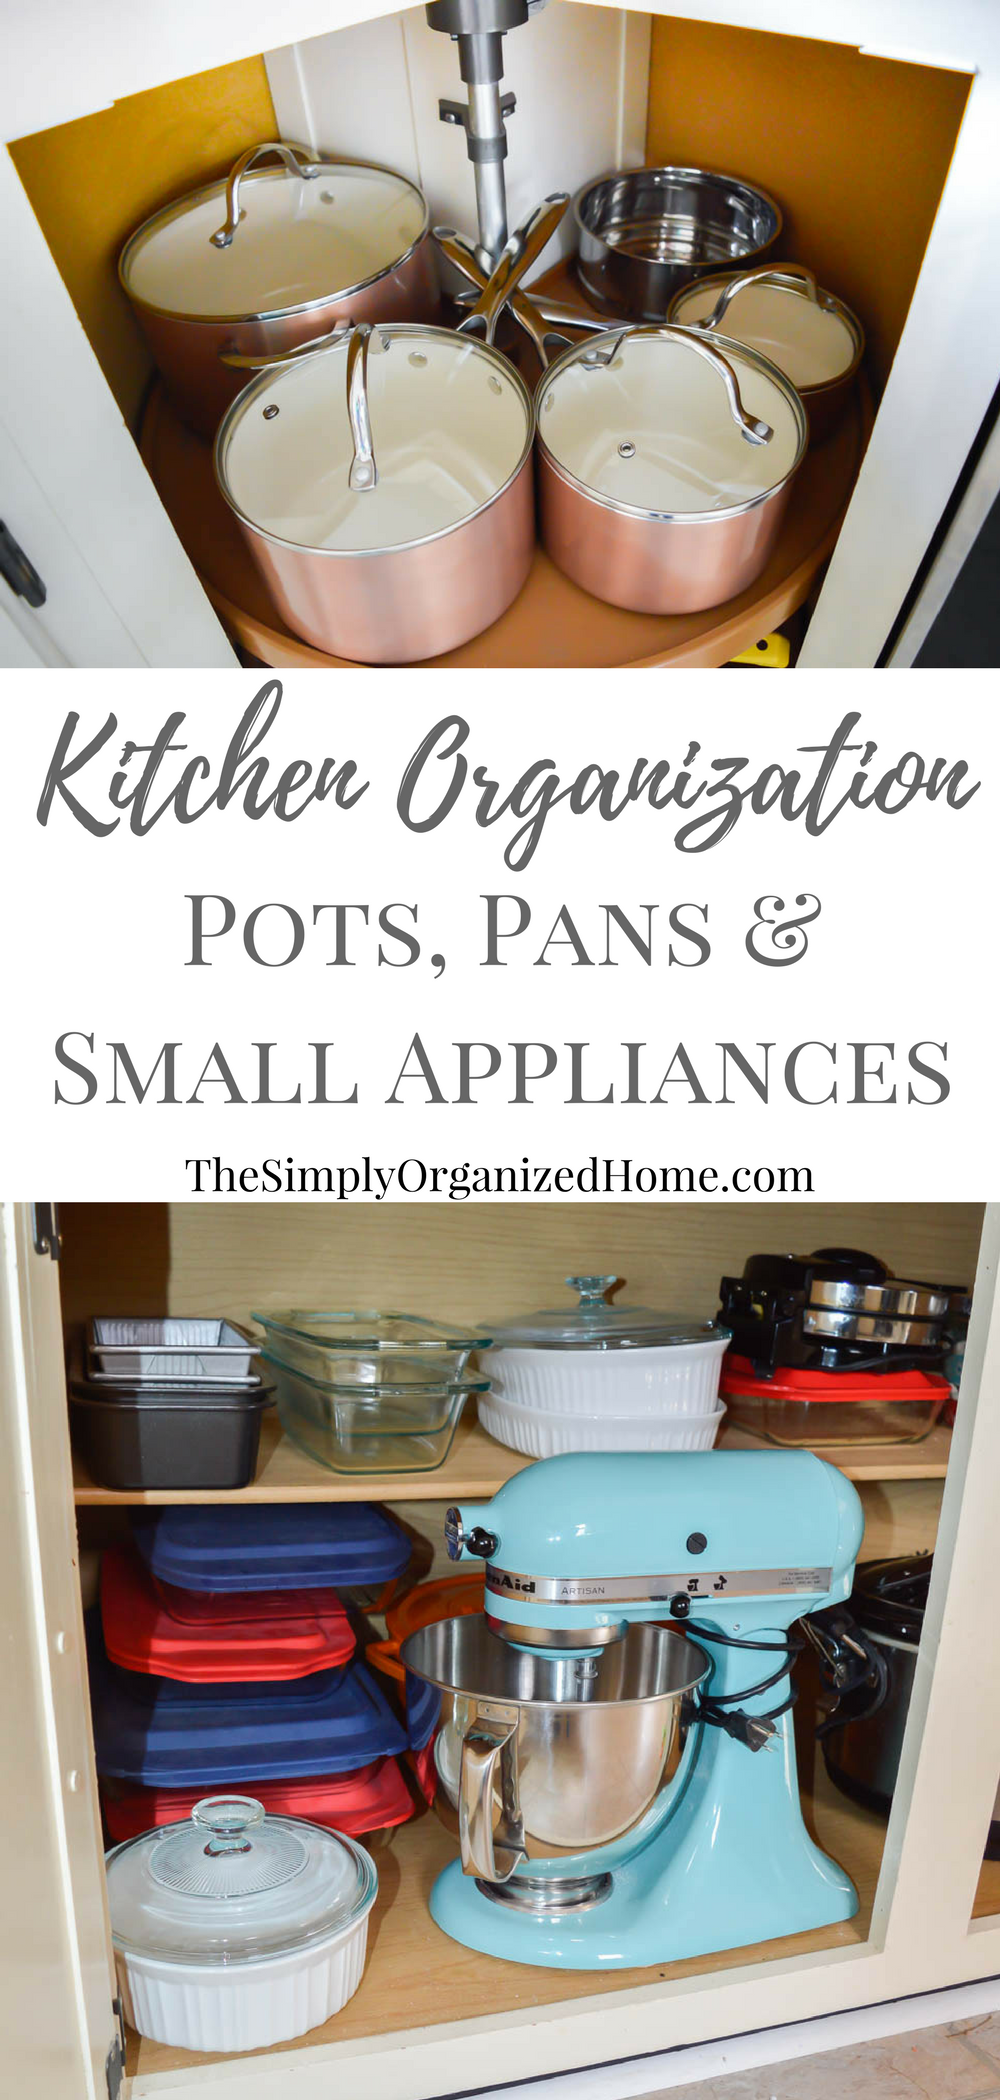 https://www.thesimplyorganizedhome.com/wp-content/uploads/2017/02/Pots-Pans-and-Small-Appliances.png